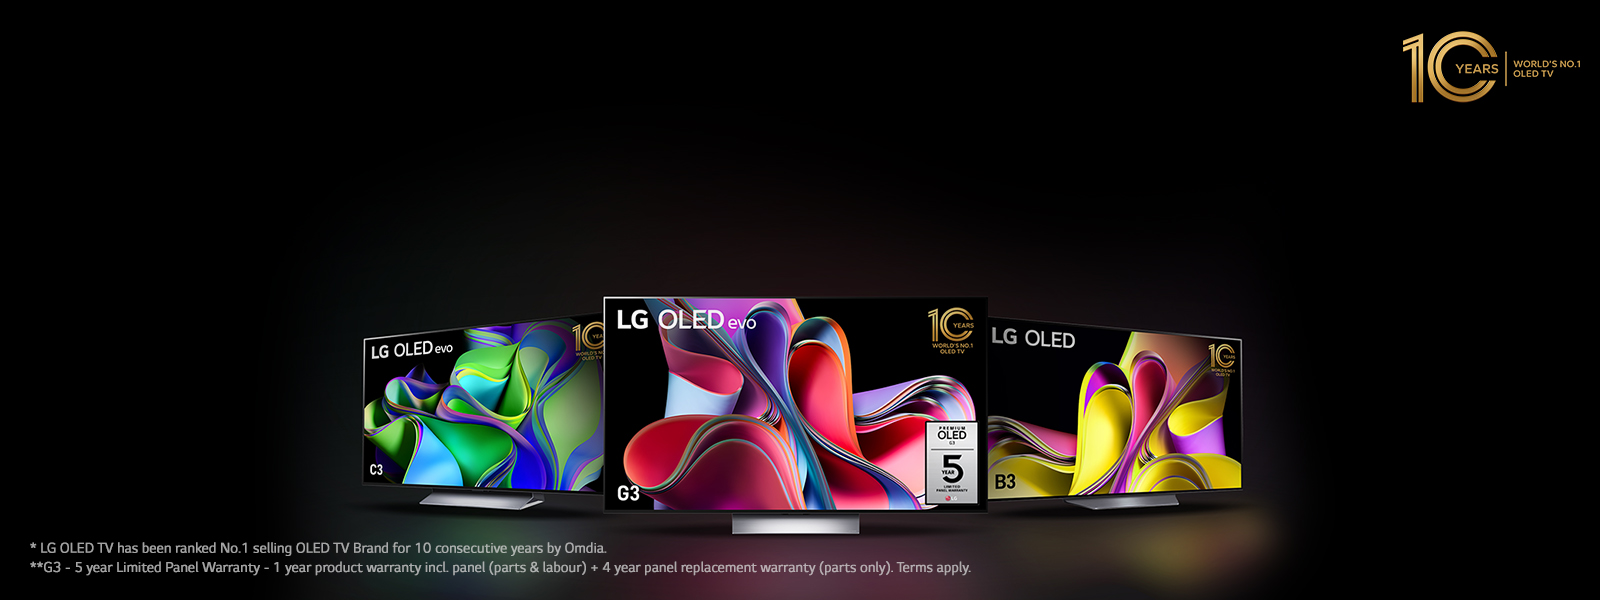 Introducing the new 2023 OLED TV Range